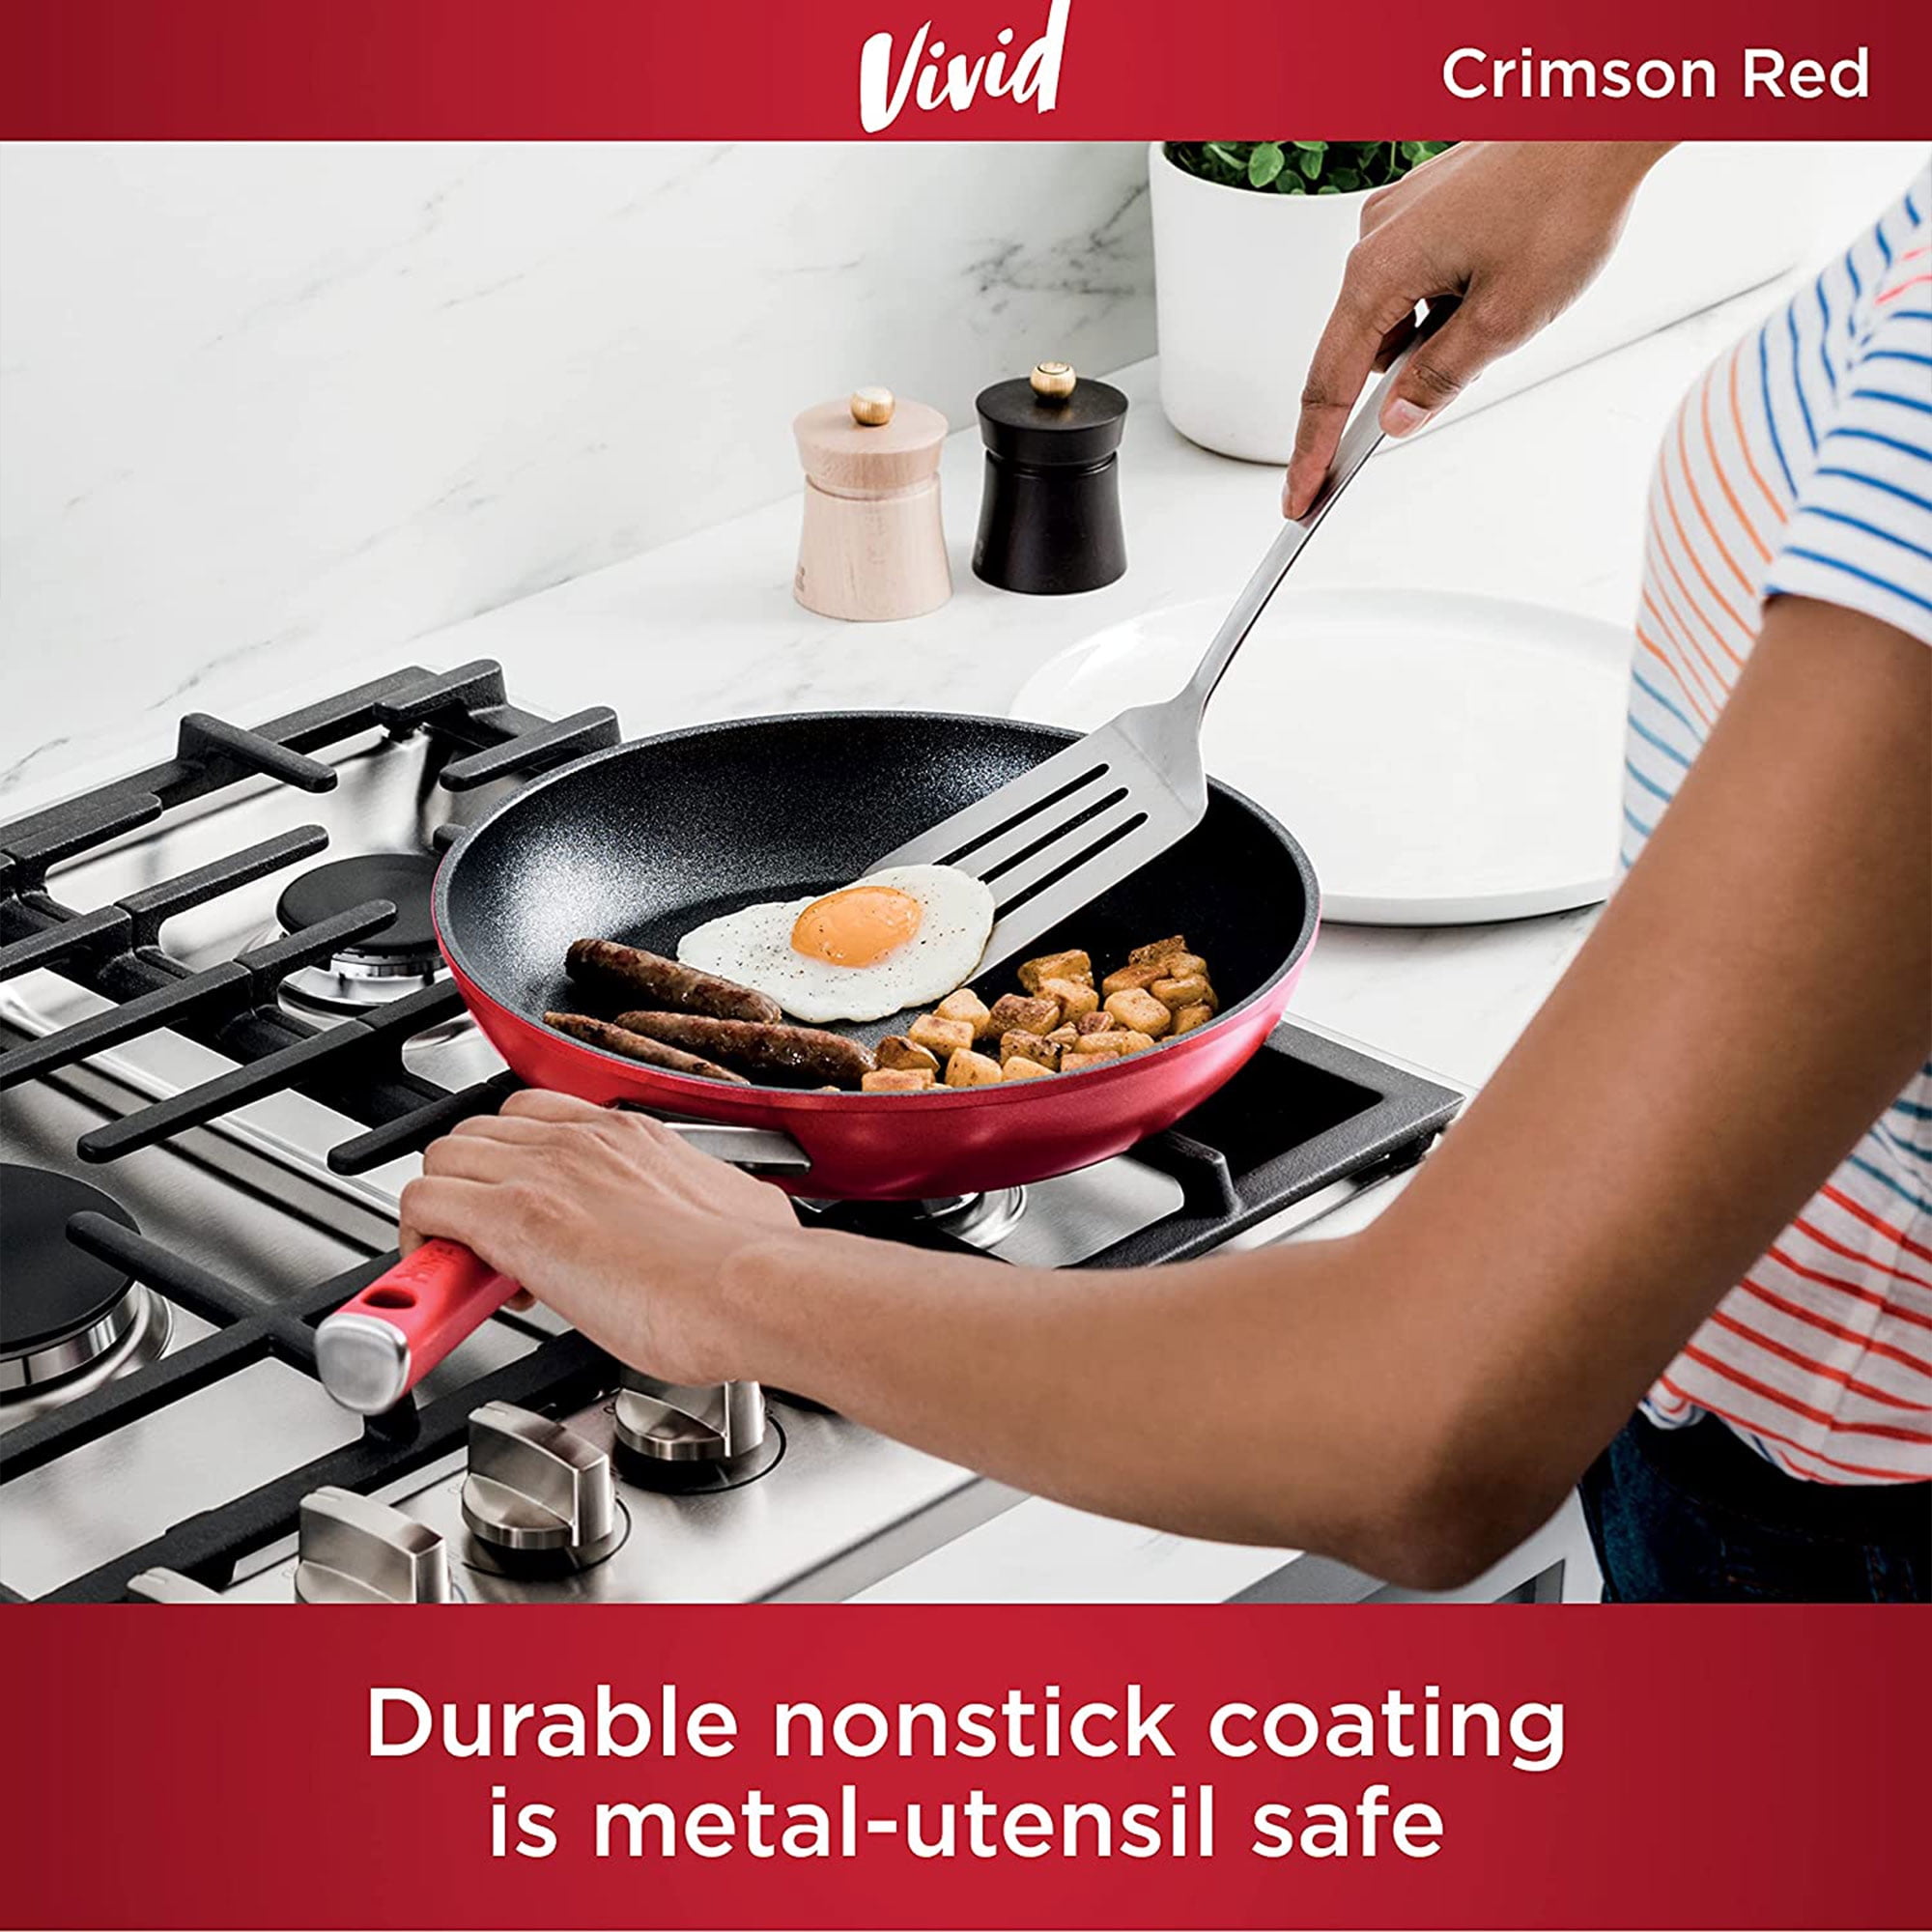 Ninja CW60030 NeverStick Comfort Grip 12 Fry Pan, Nonstick, Durable, Scratch Resistant, Dishwasher Safe, Oven Safe to 400°F, Silicone Handles, Grey